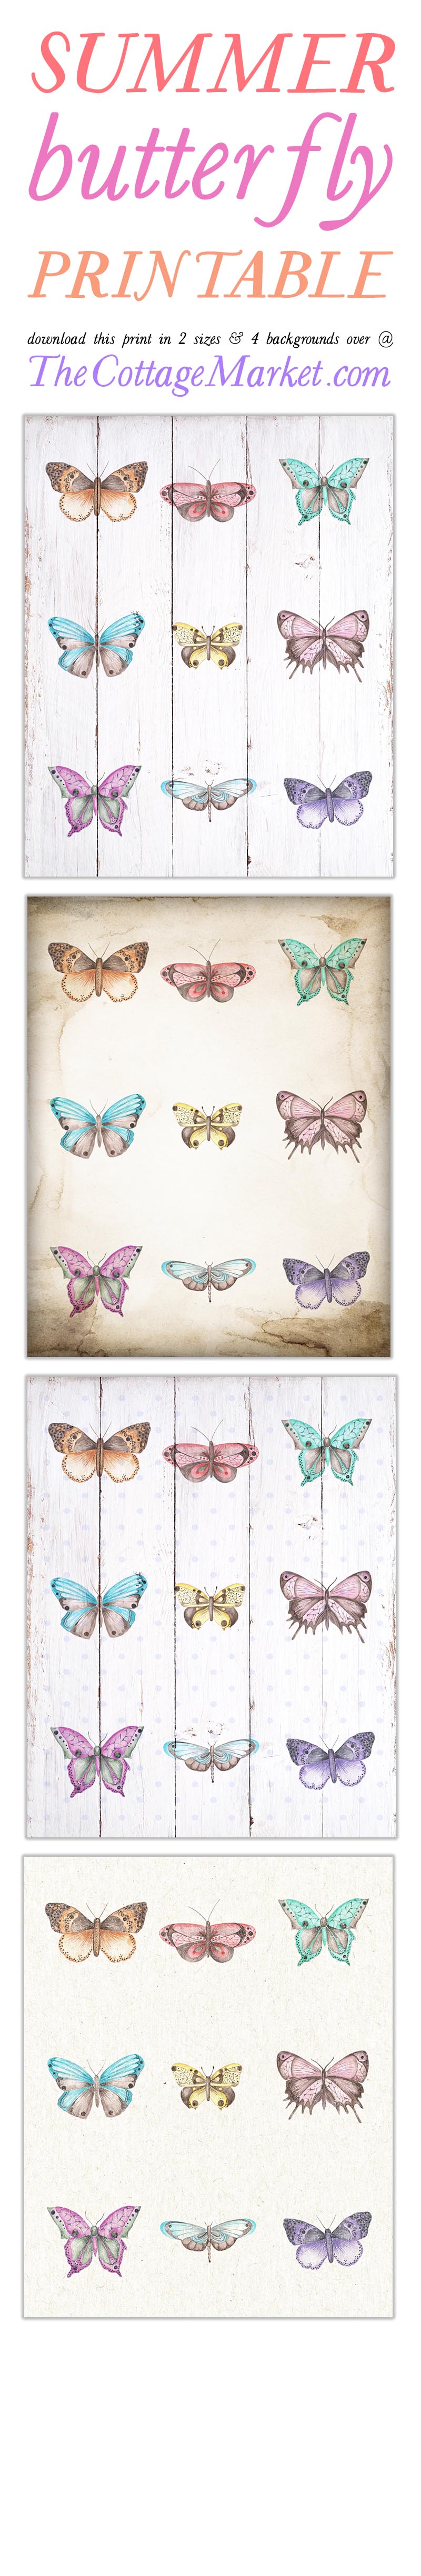 This Summer Butterfly Printable is going to add a pop of color and a touch of pretty to your space in a snap!